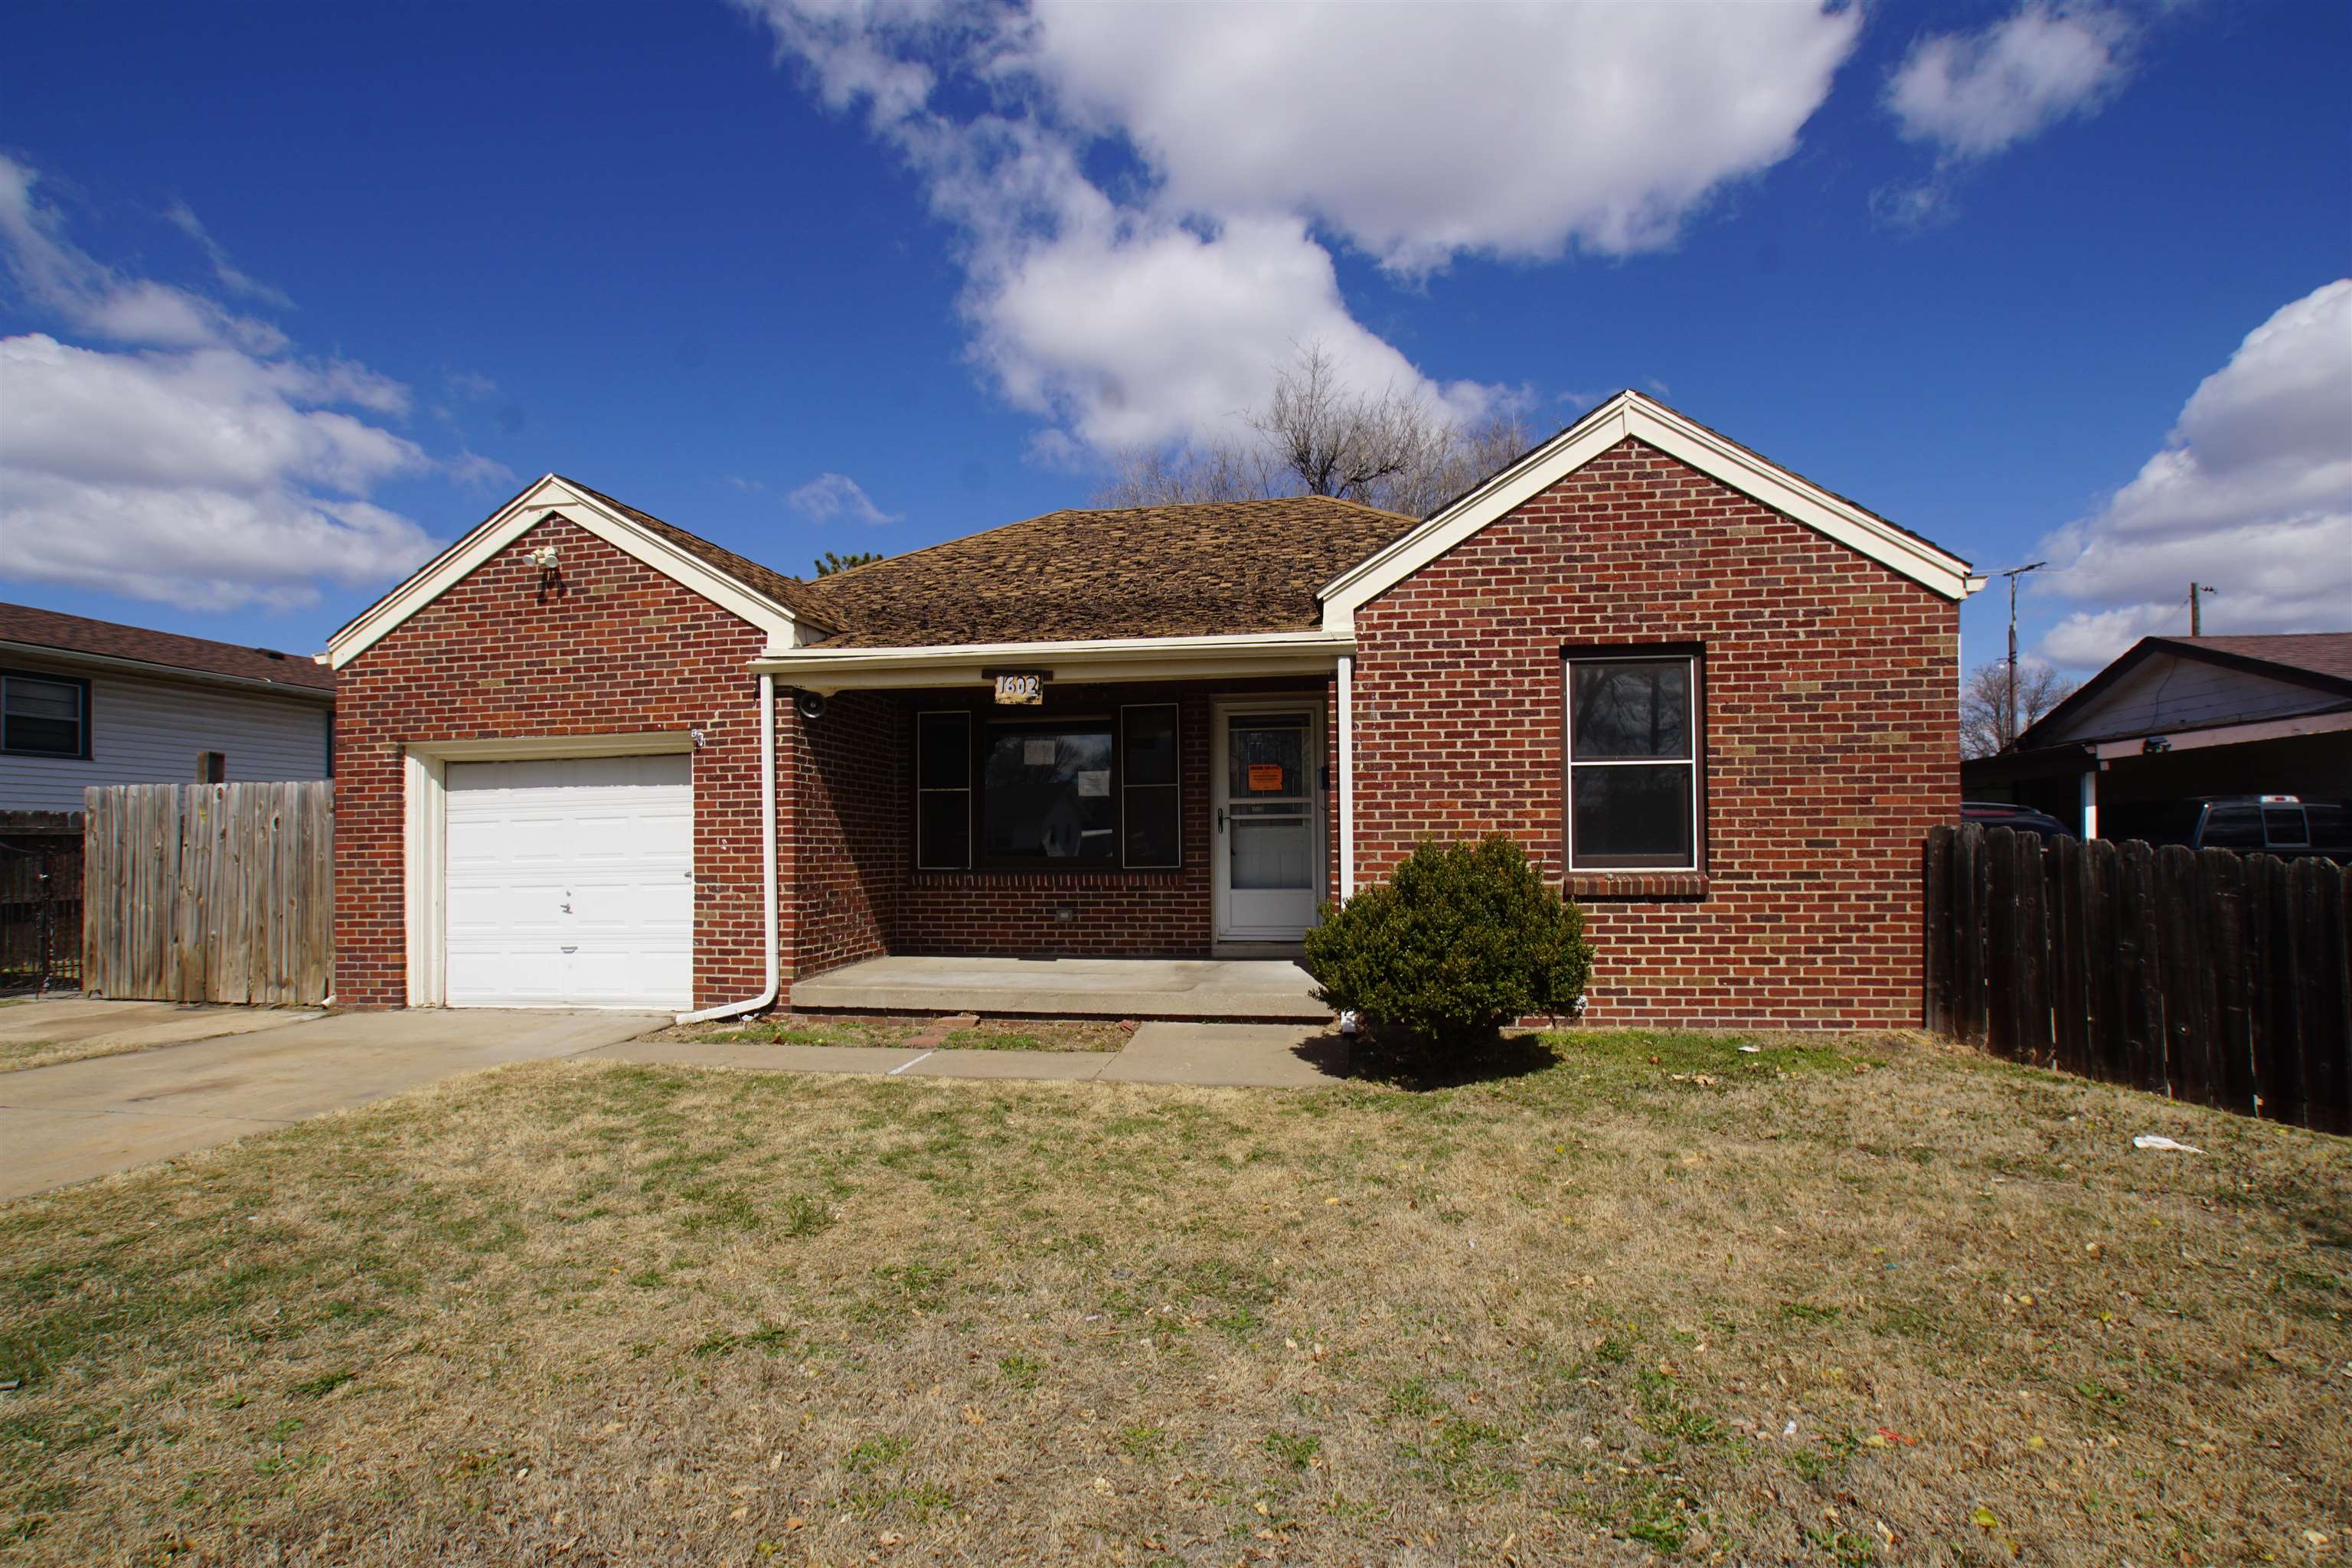 This 2 bdrm, 1 ba brick ranch home features wood laminate floors, updated kitchen and bathroom, unfi